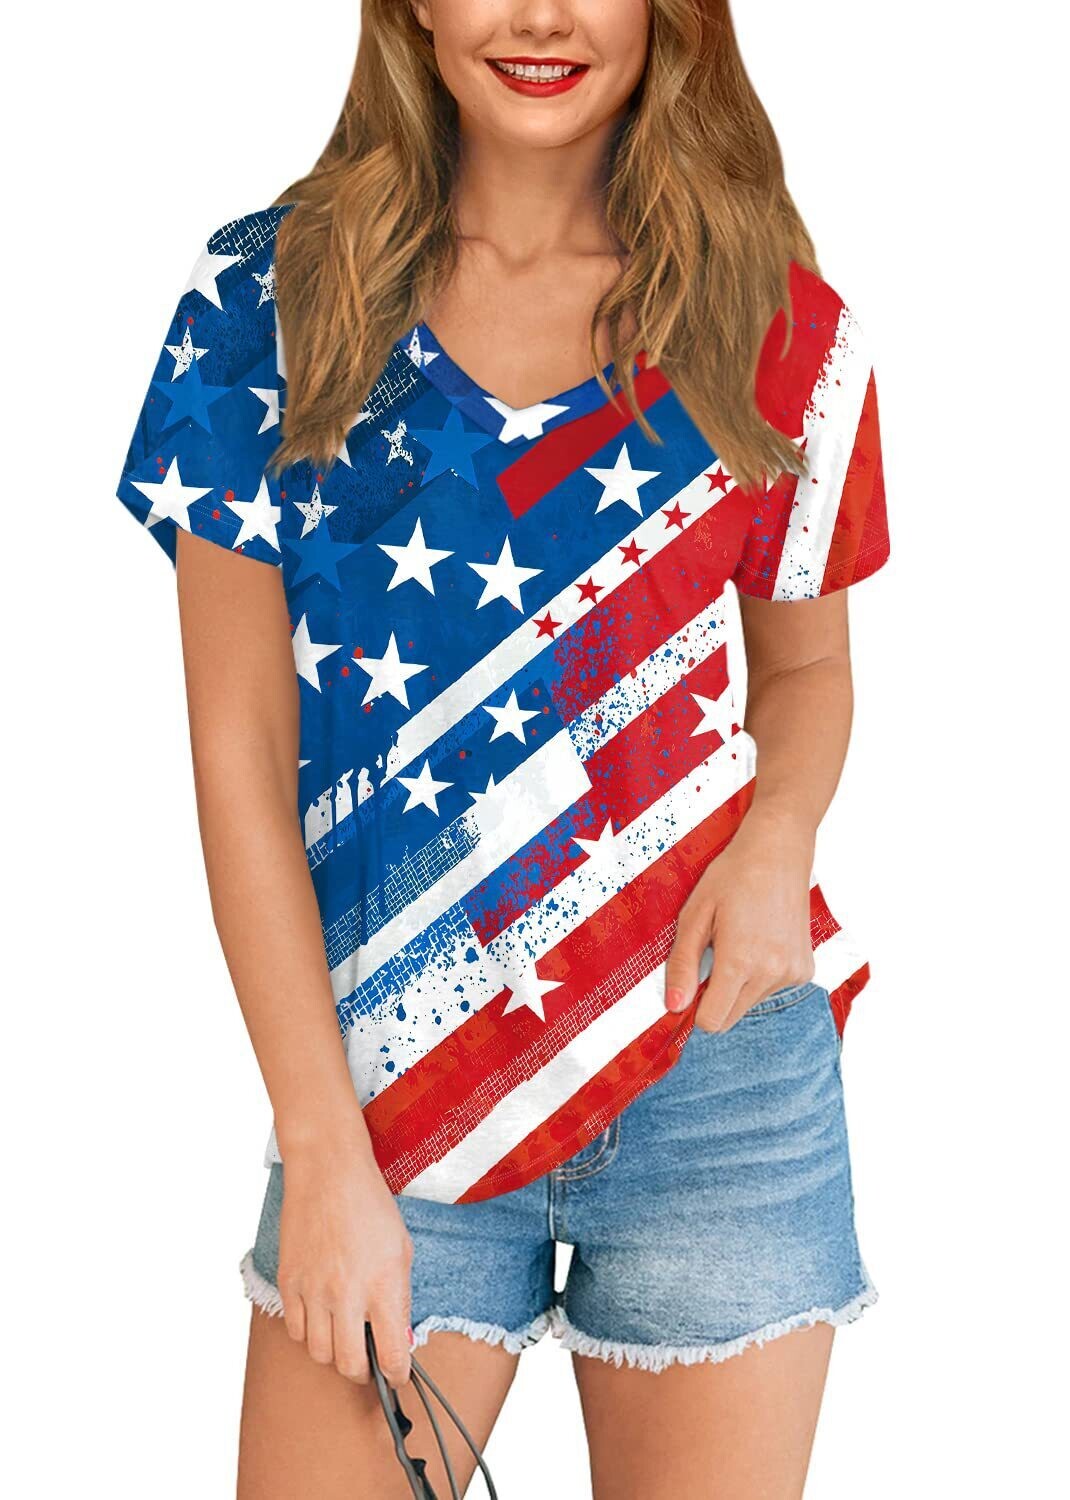 American Women Clothing 3D Full Body Printing All-match Independence Day Short-sleeved Stars And Stripes Bottoming T-shirt